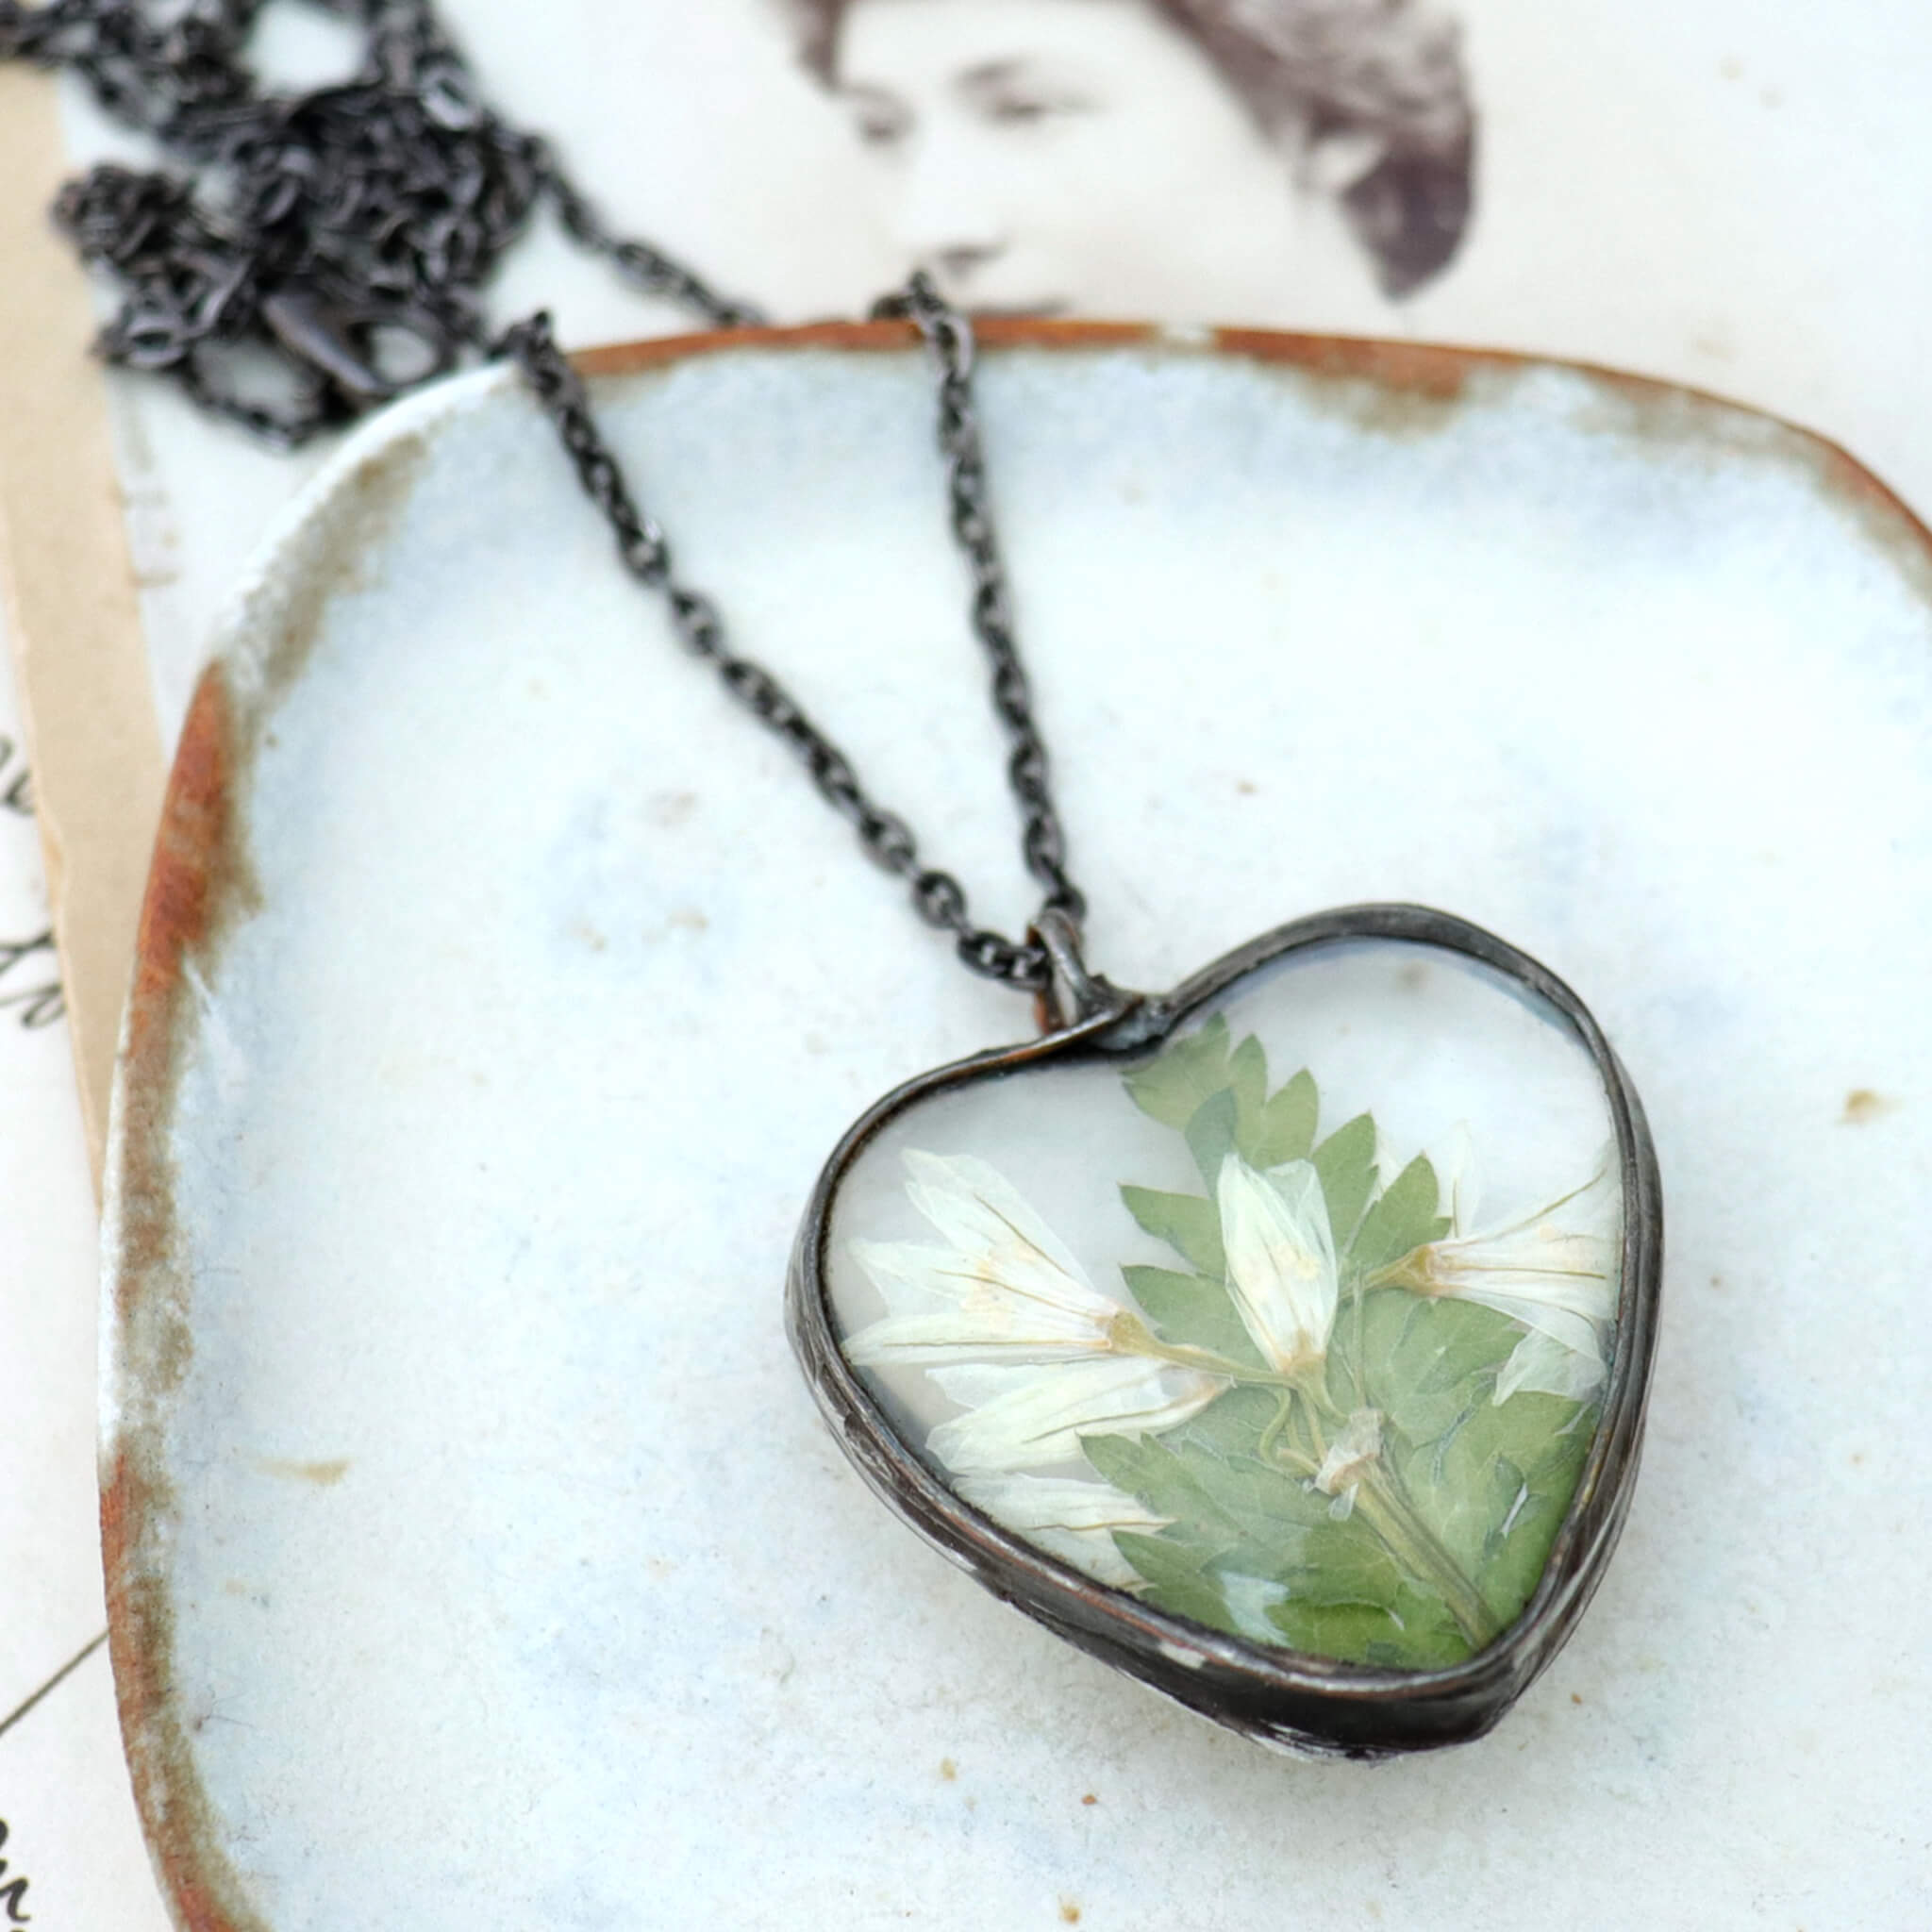 Stained glass style pressed flowers necklace lying on a white dish